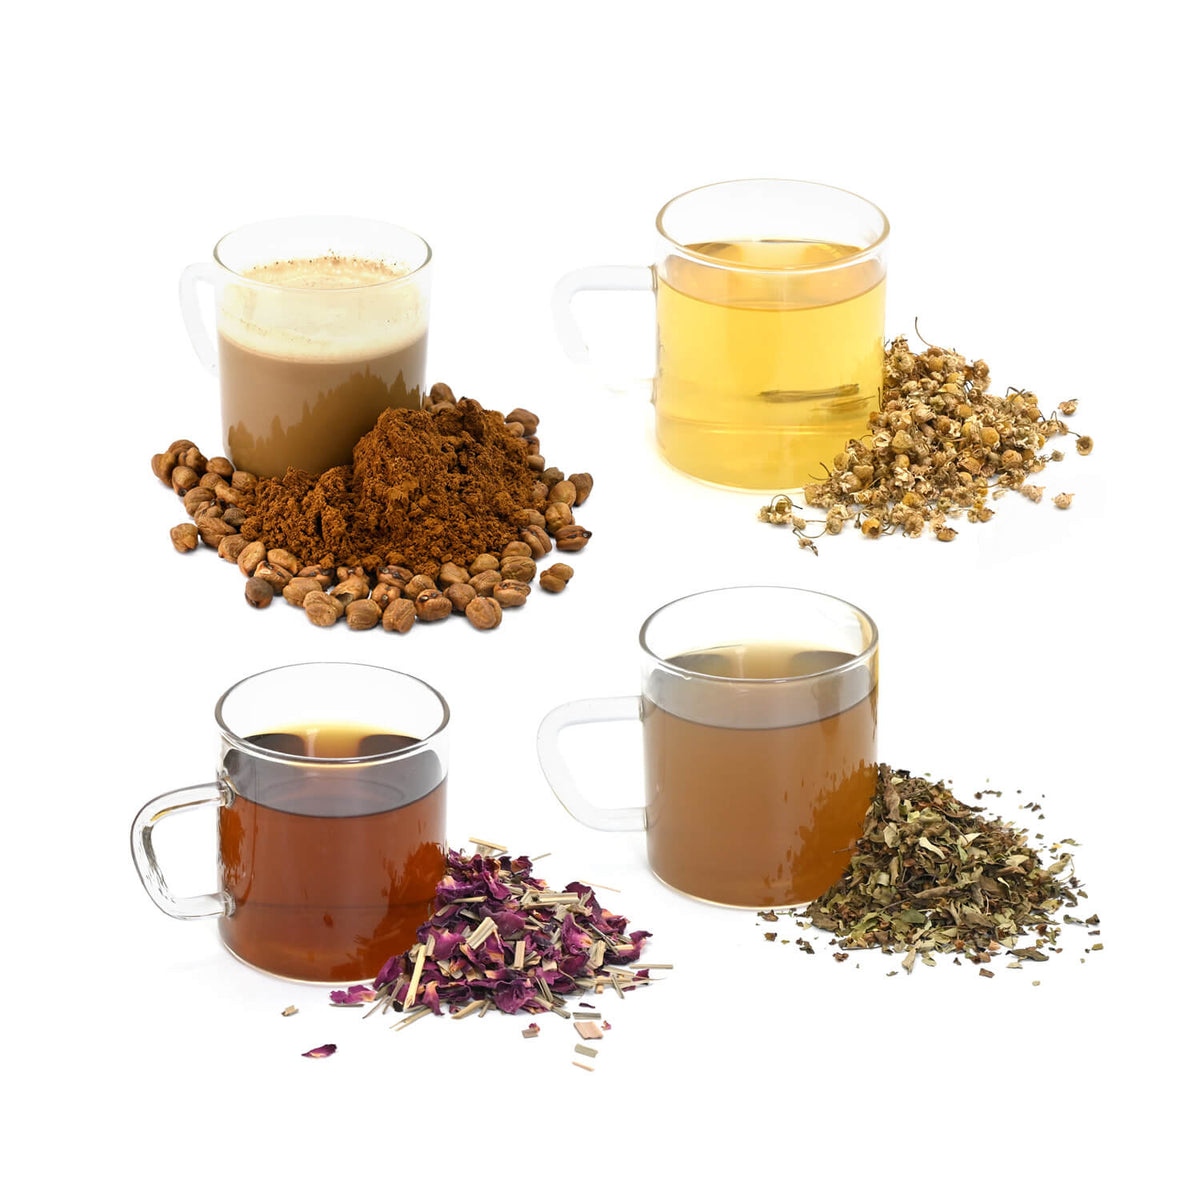 Natural, Organically Grown, Caffeine-Free & Chemical-Free Healthy Alternatives to help you overcome Tea/ Coffee Addiction!